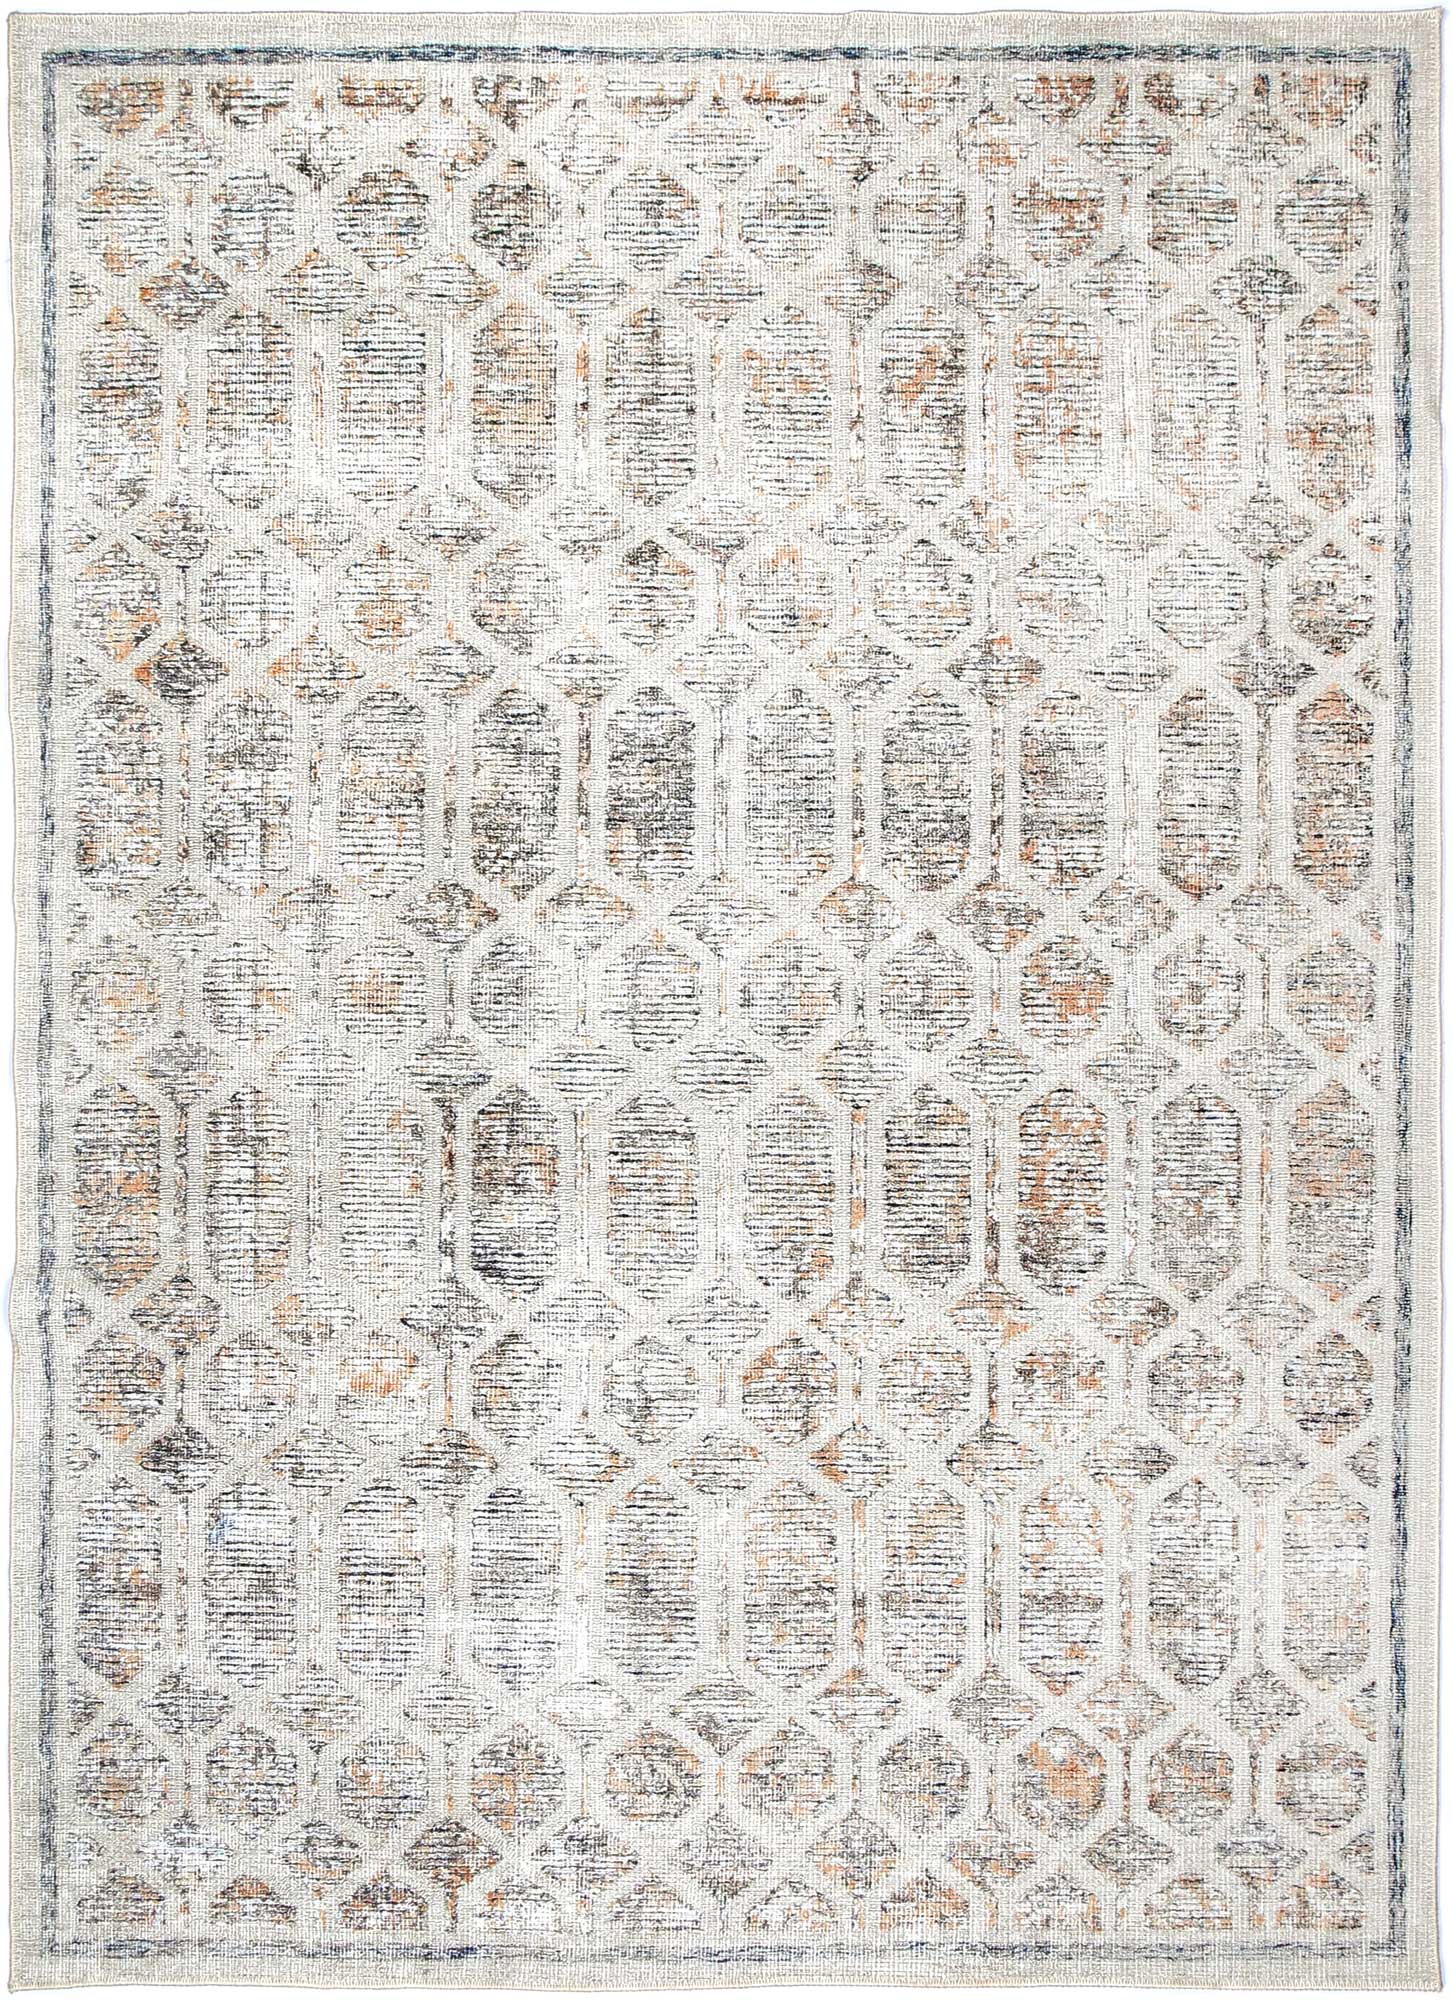 Chantilly Lace Multi Rug